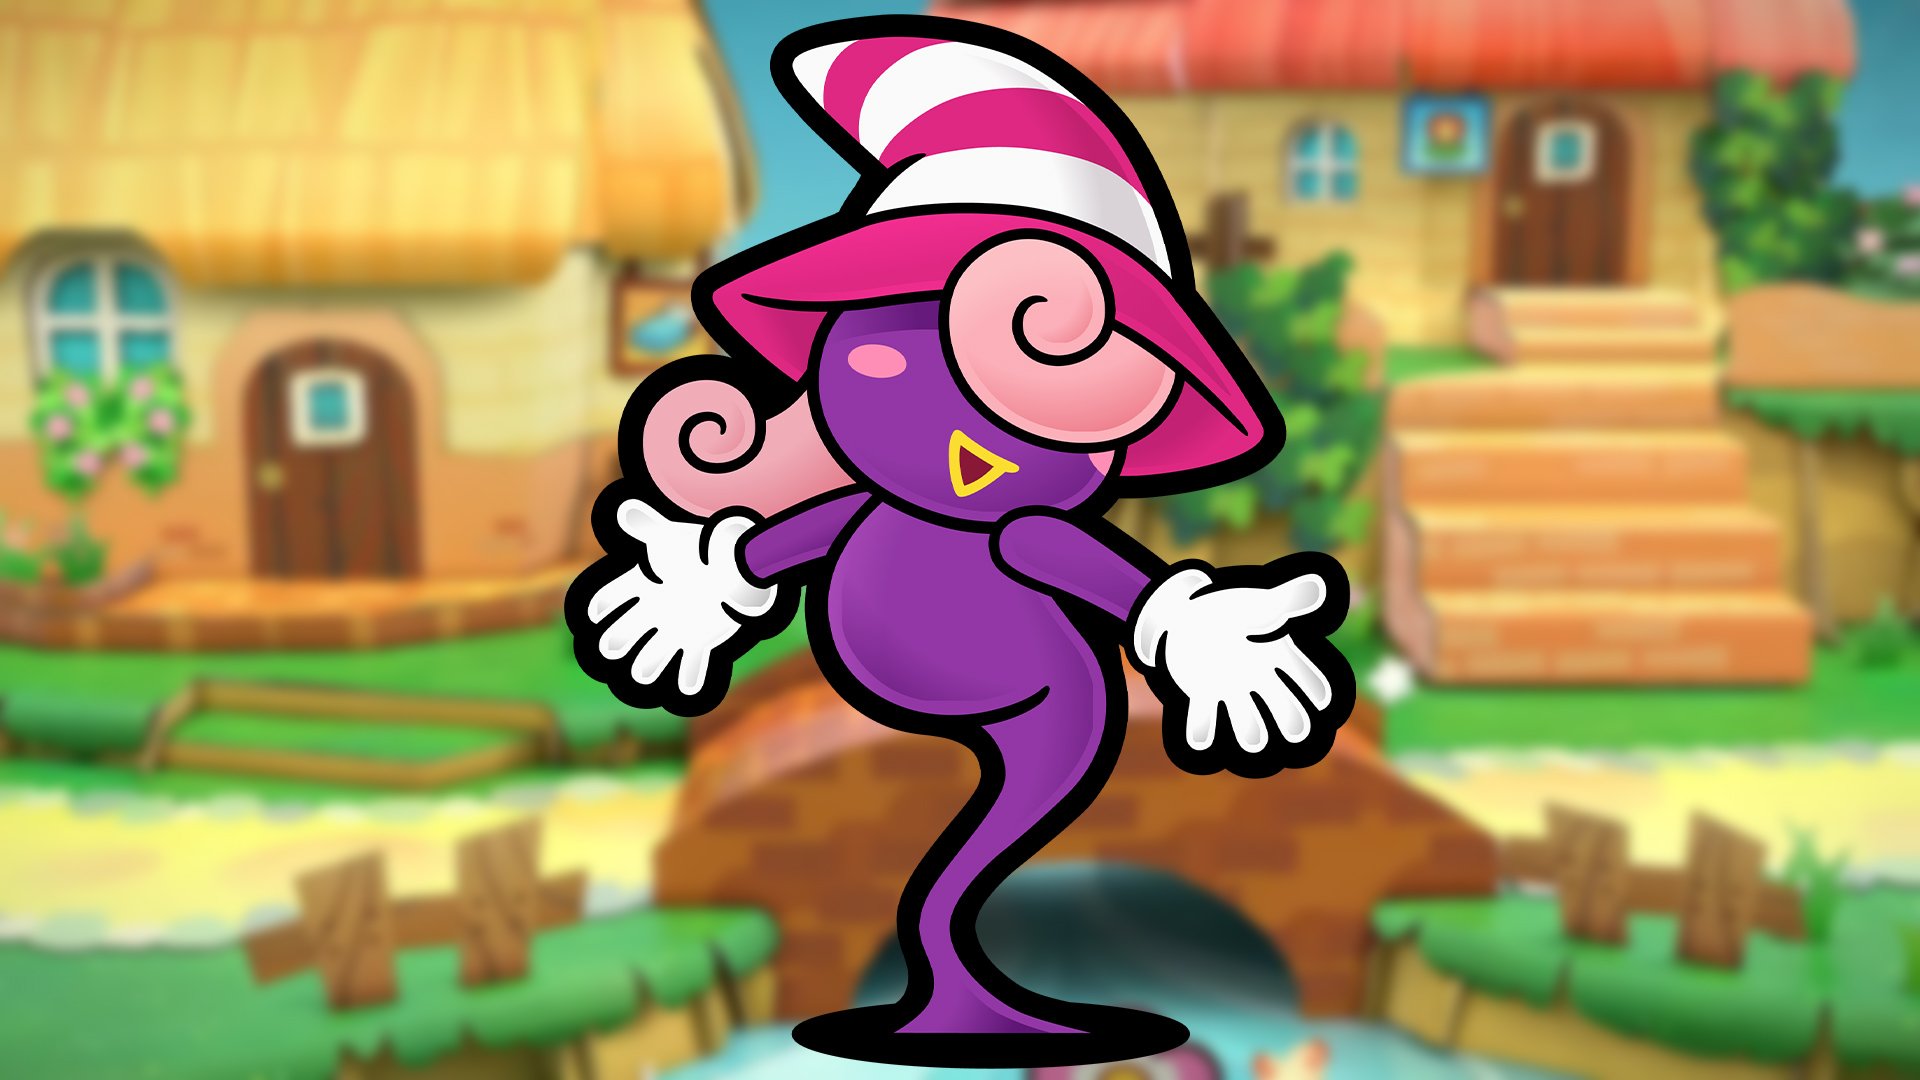 Paper Mario Thousand-Year Door remake reinstates a censored character’s trans status